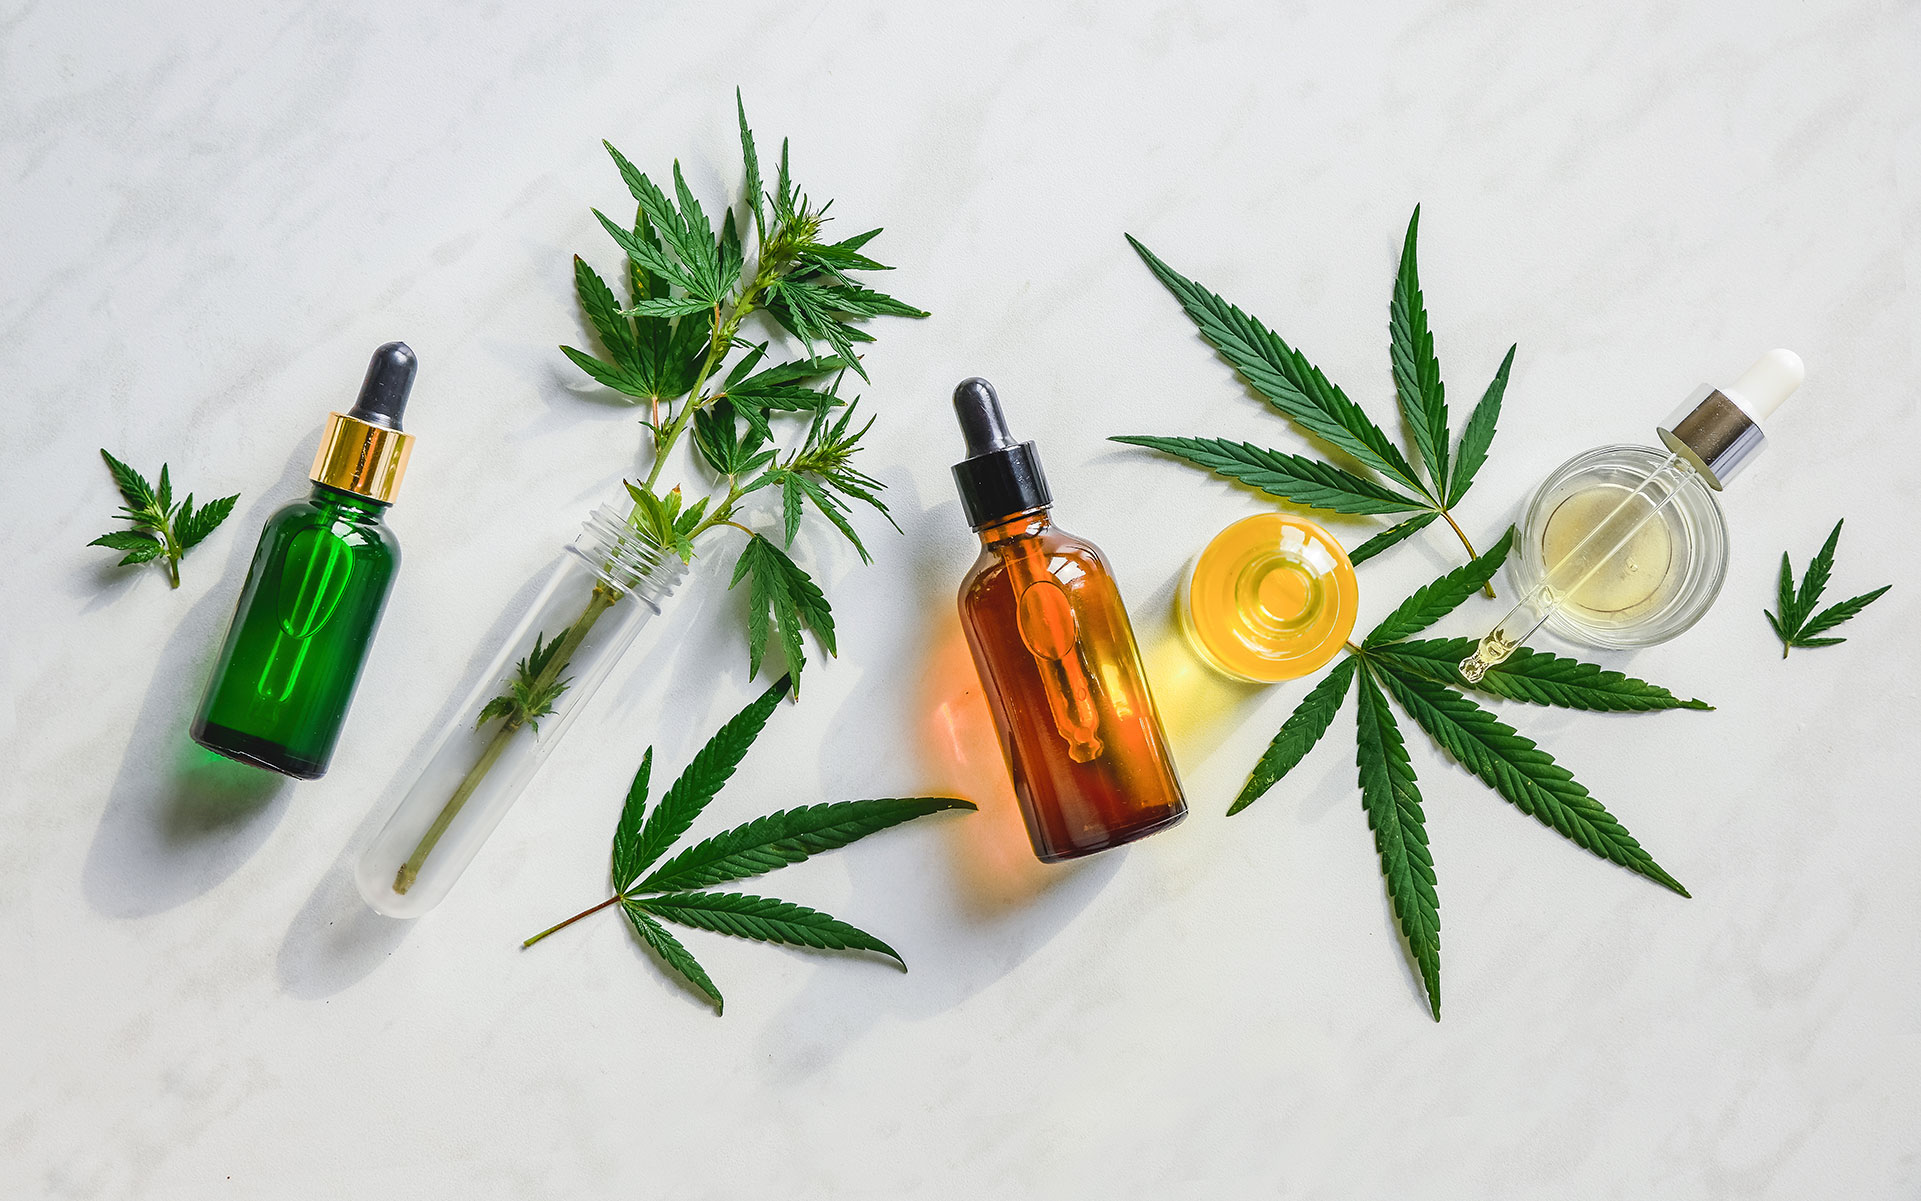 How To Use Cbd Oil For Inflammation - Cbd|Oil|Cannabidiol|Products|View|Abstract|Effects|Hemp|Cannabis|Product|Thc|Pain|People|Health|Body|Plant|Cannabinoids|Medications|Oils|Drug|Benefits|System|Study|Marijuana|Anxiety|Side|Research|Effect|Liver|Quality|Treatment|Studies|Epilepsy|Symptoms|Gummies|Compounds|Dose|Time|Inflammation|Bottle|Cbd Oil|View Abstract|Side Effects|Cbd Products|Endocannabinoid System|Multiple Sclerosis|Cbd Oils|Cbd Gummies|Cannabis Plant|Hemp Oil|Cbd Product|Hemp Plant|United States|Cytochrome P450|Many People|Chronic Pain|Nuleaf Naturals|Royal Cbd|Full-Spectrum Cbd Oil|Drug Administration|Cbd Oil Products|Medical Marijuana|Drug Test|Heavy Metals|Clinical Trial|Clinical Trials|Cbd Oil Side|Rating Highlights|Wide Variety|Animal Studies